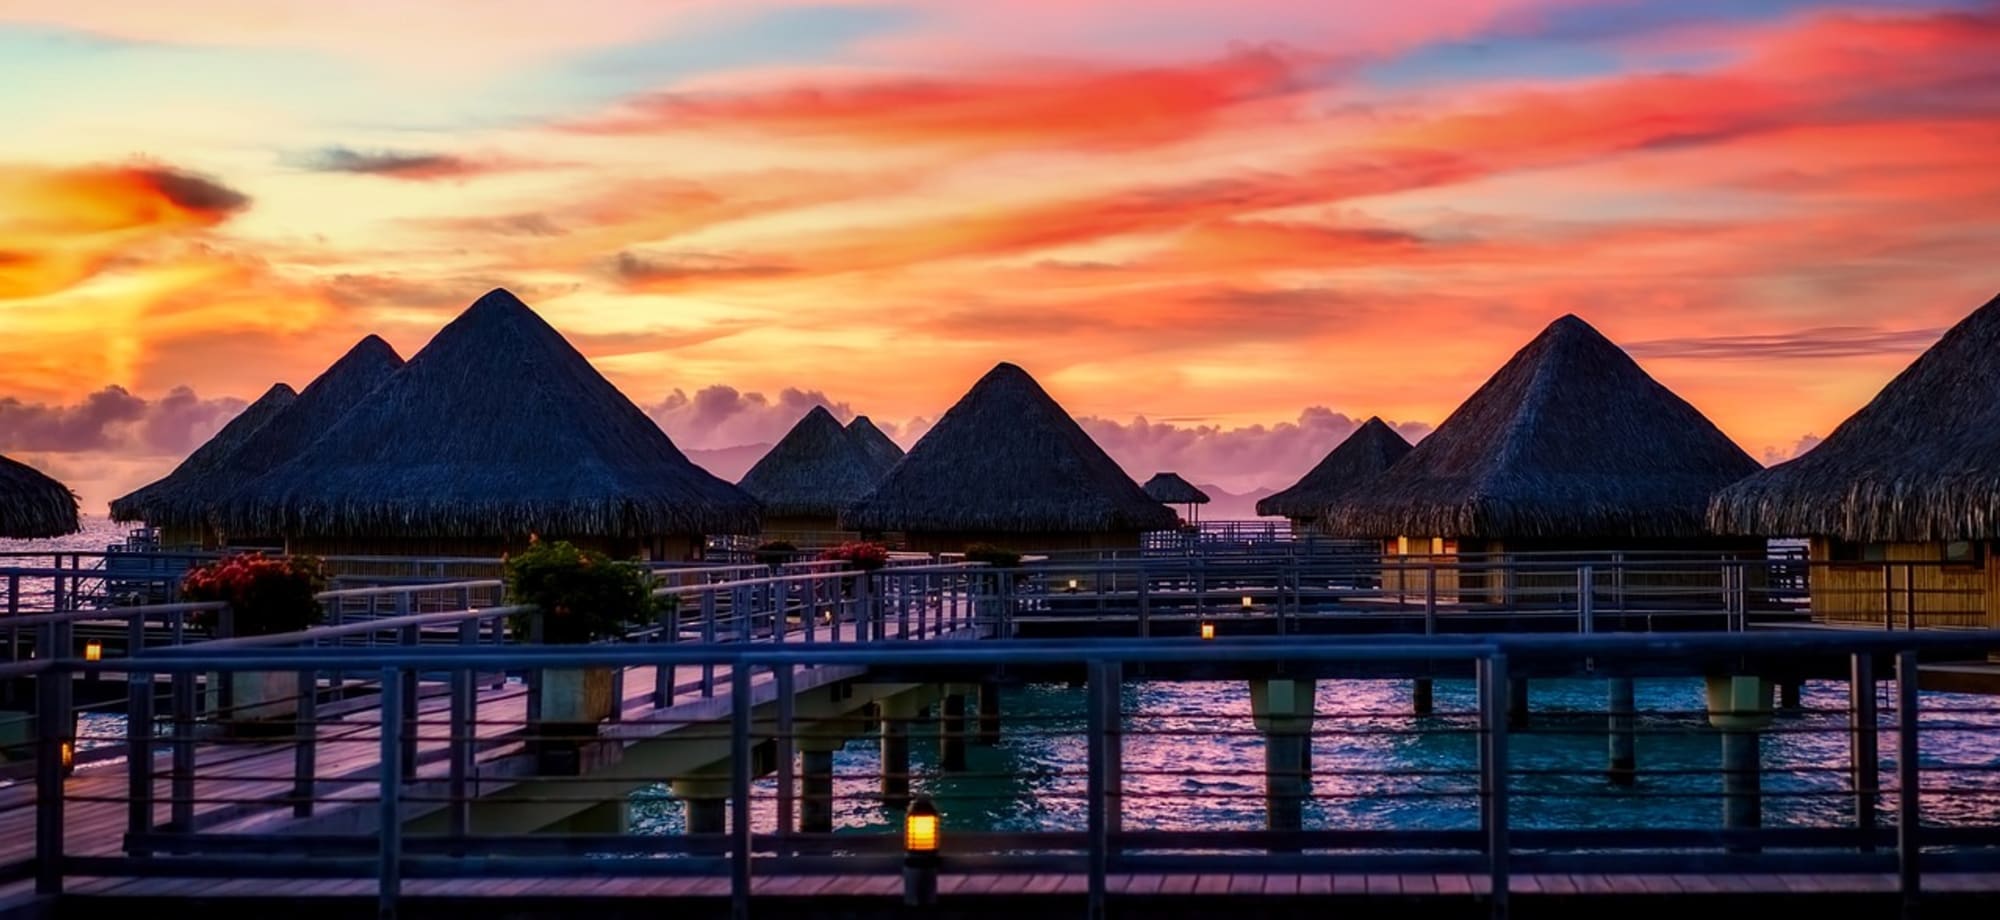 The sun has set, cascading orange and yellow hues across the sky and the overwater villas are purple. 